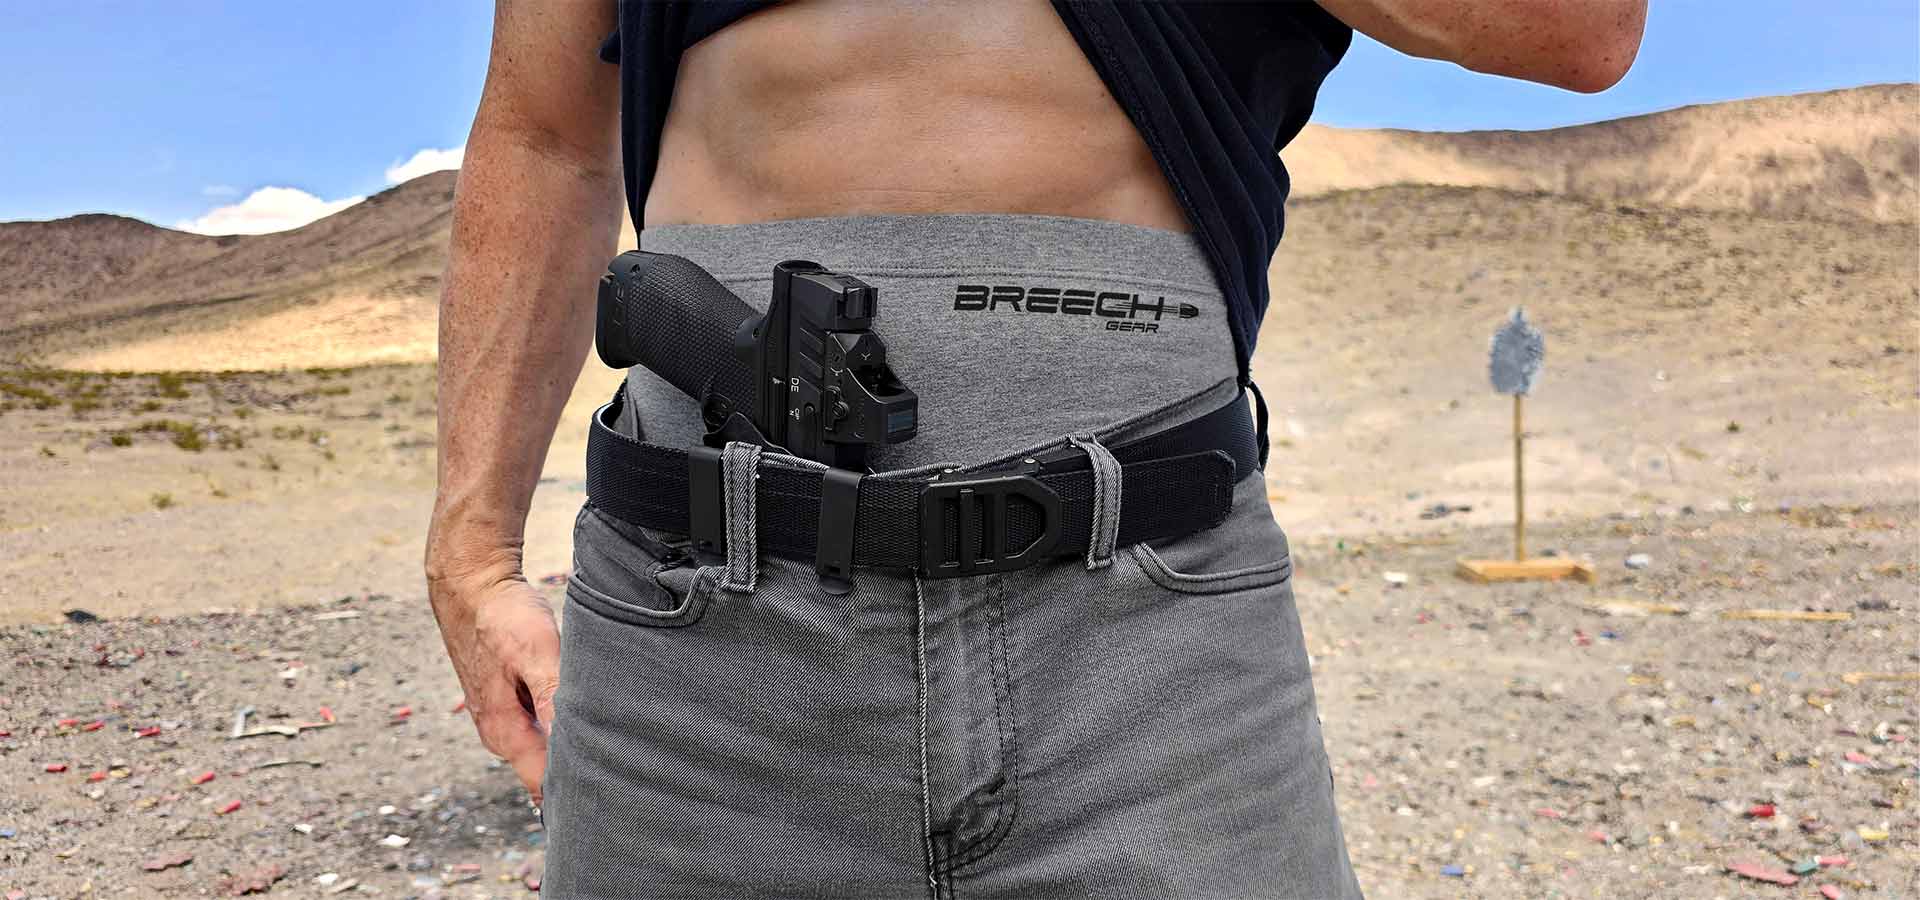 Testing Breech Gear's moisture wicking mid-waisted boxer briefs protect against sweat in the hot desert. 